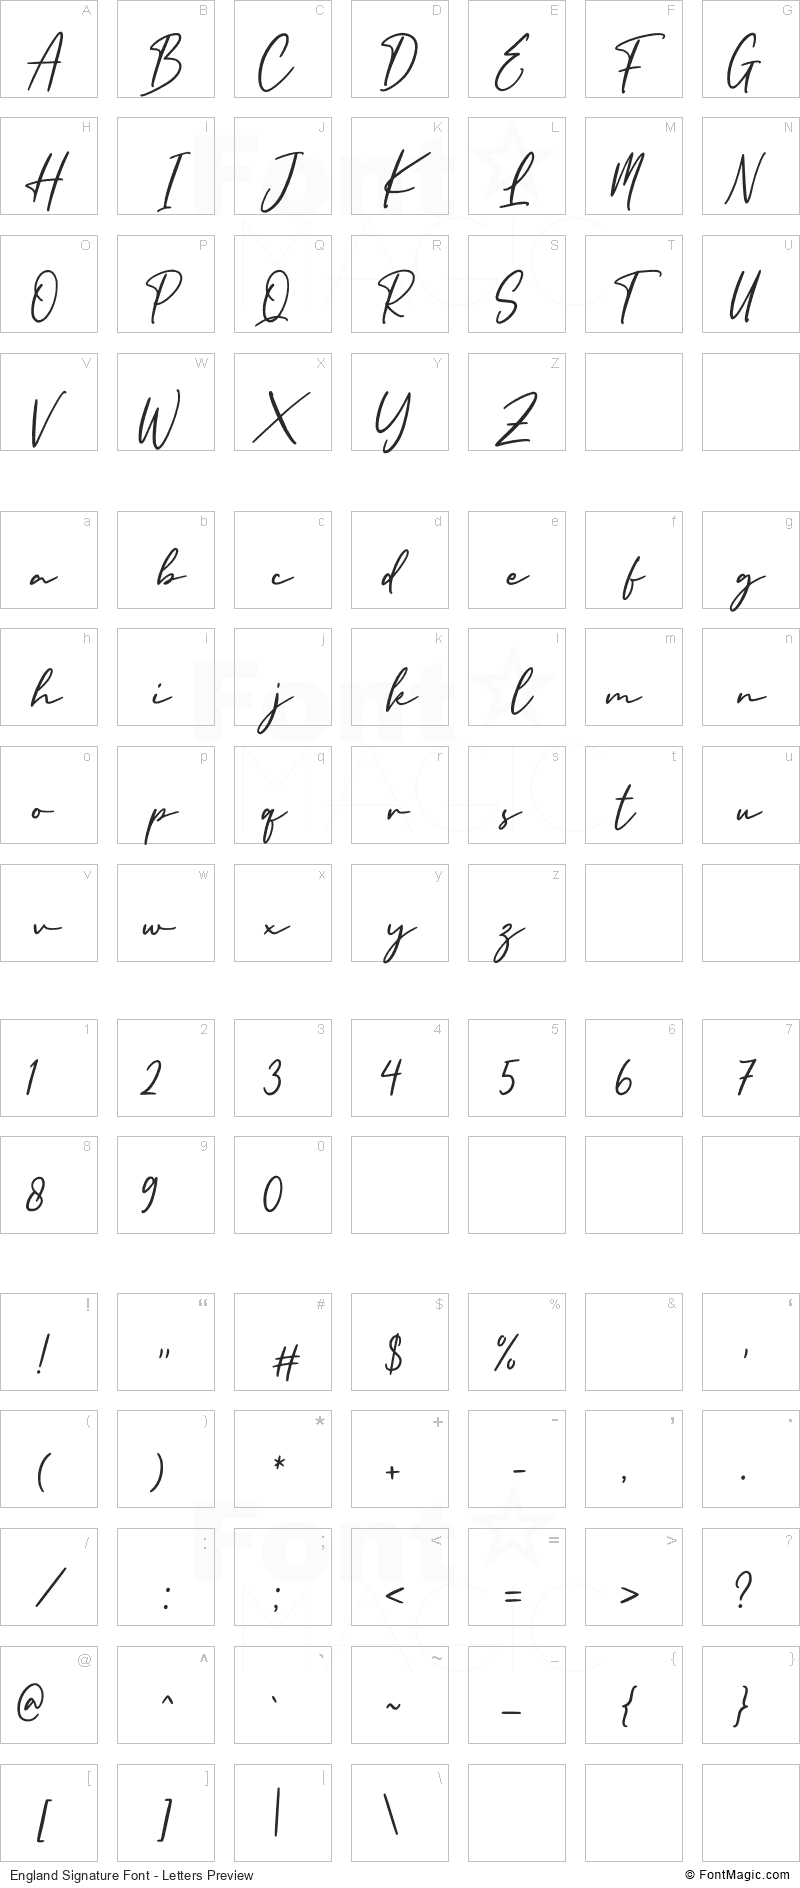 England Signature Font - All Latters Preview Chart